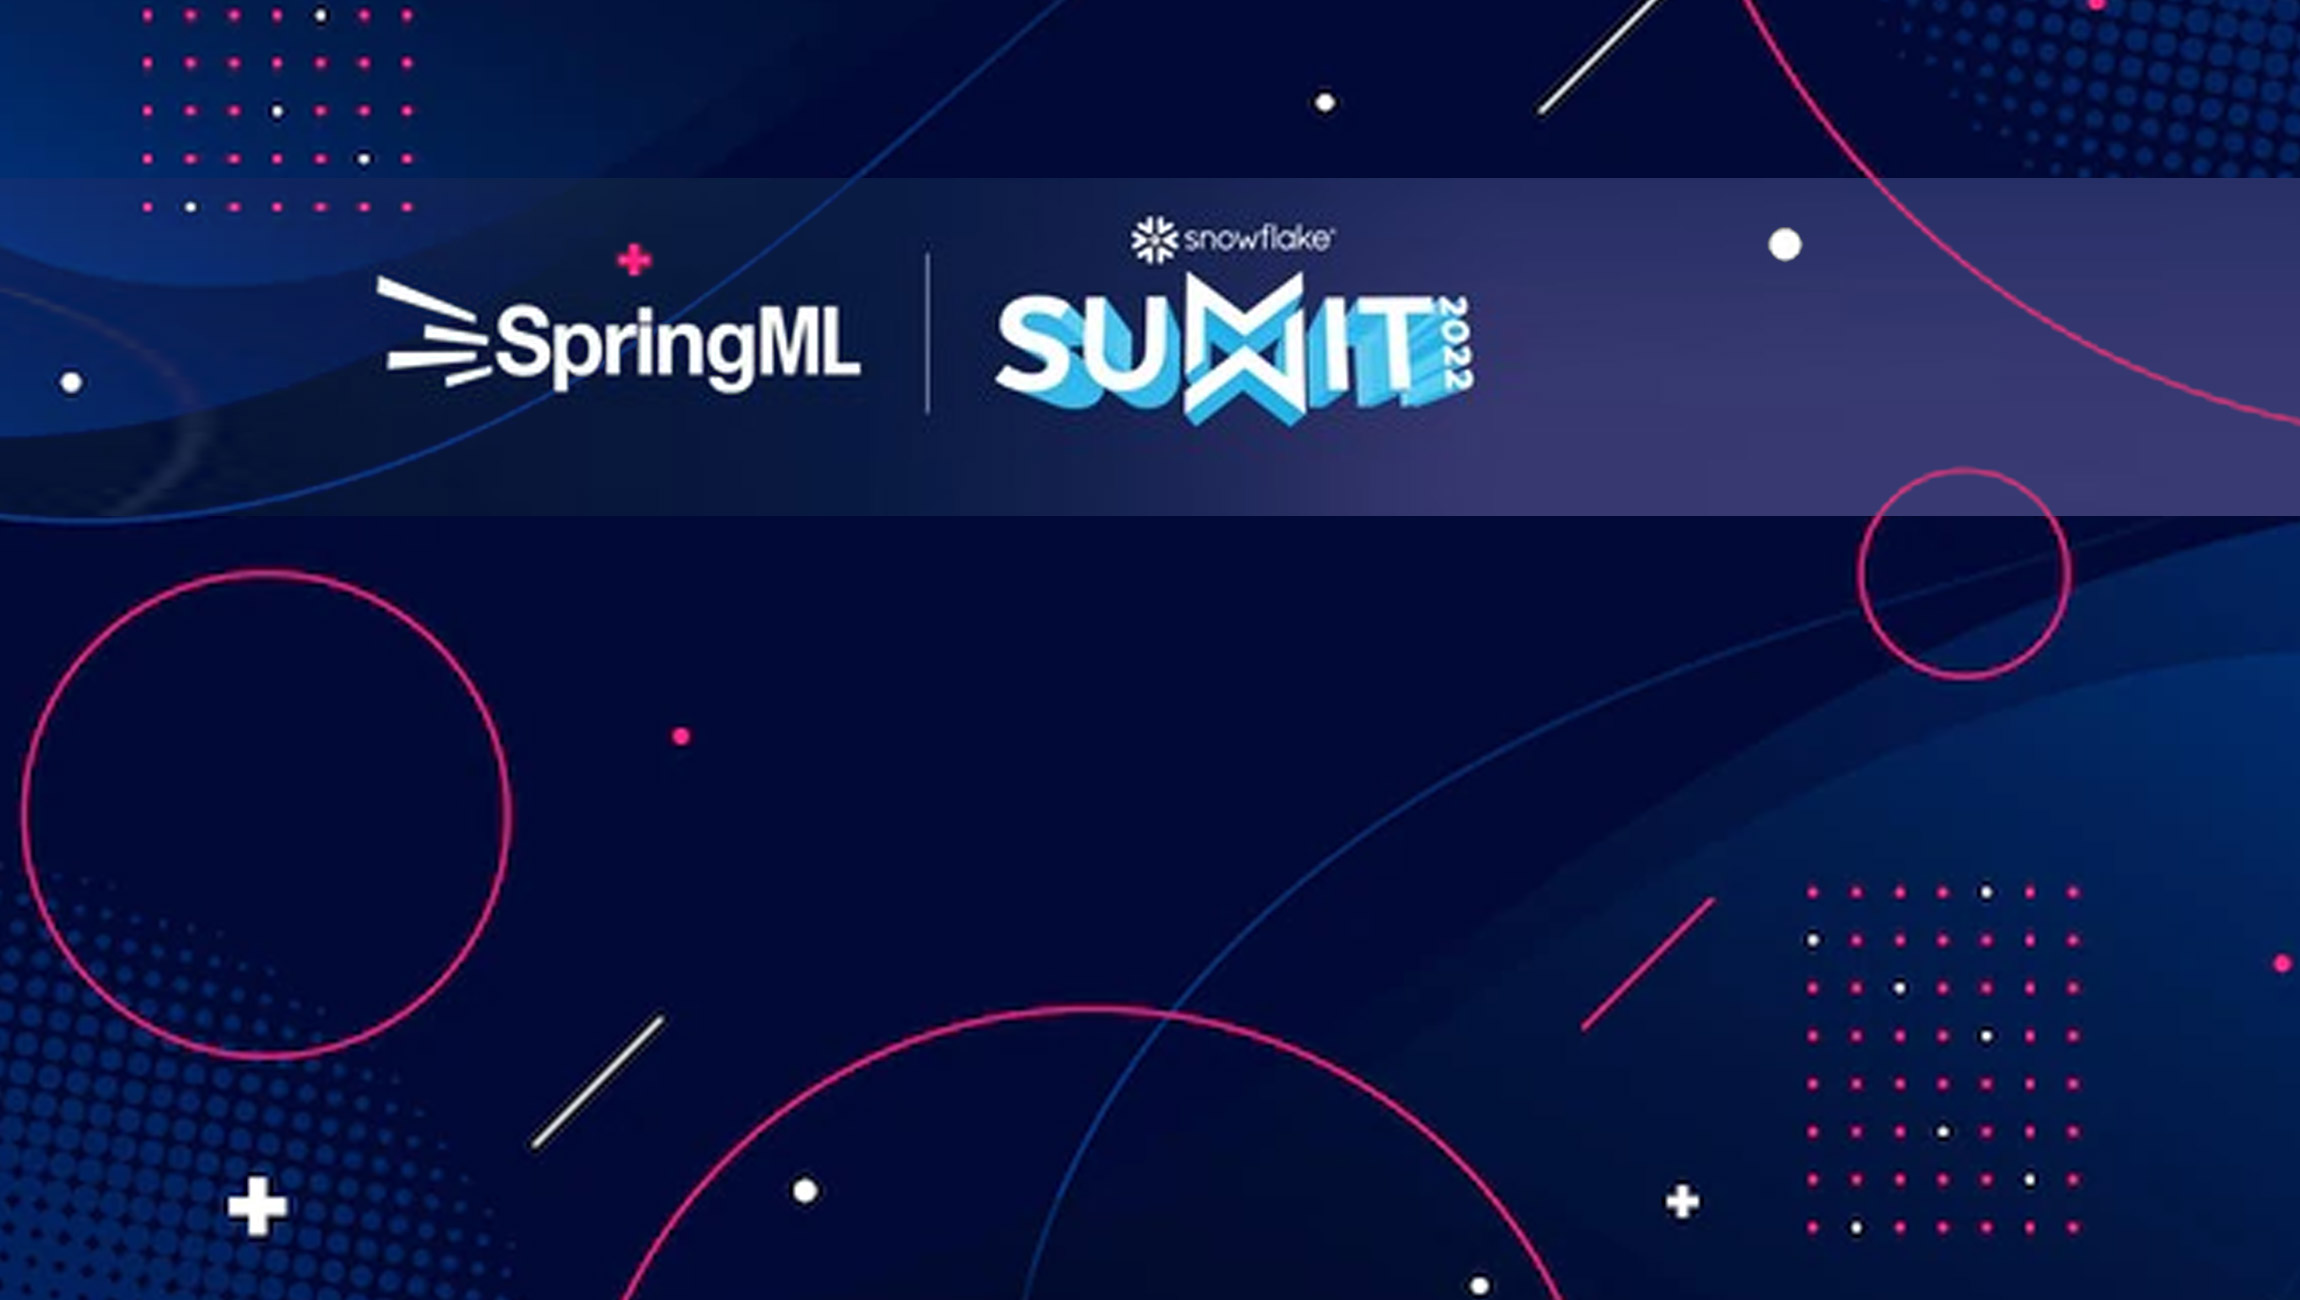 SpringML Announce Their Advanced Forecasting Solutions at The Snowflake Summit 2022